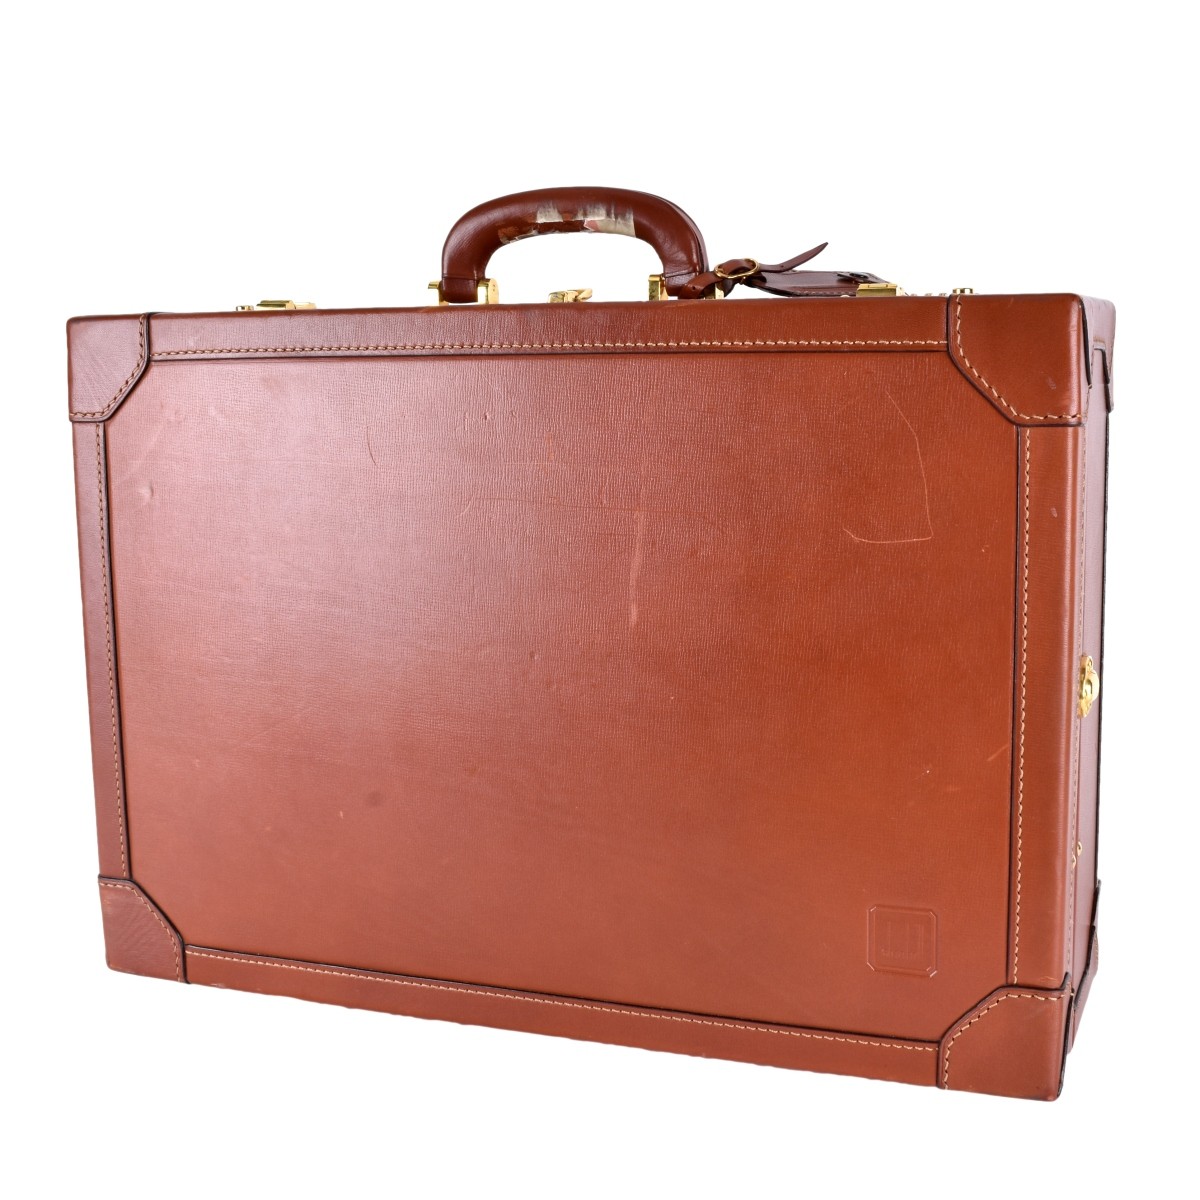 Dunhill Suitcase | Kodner Auctions